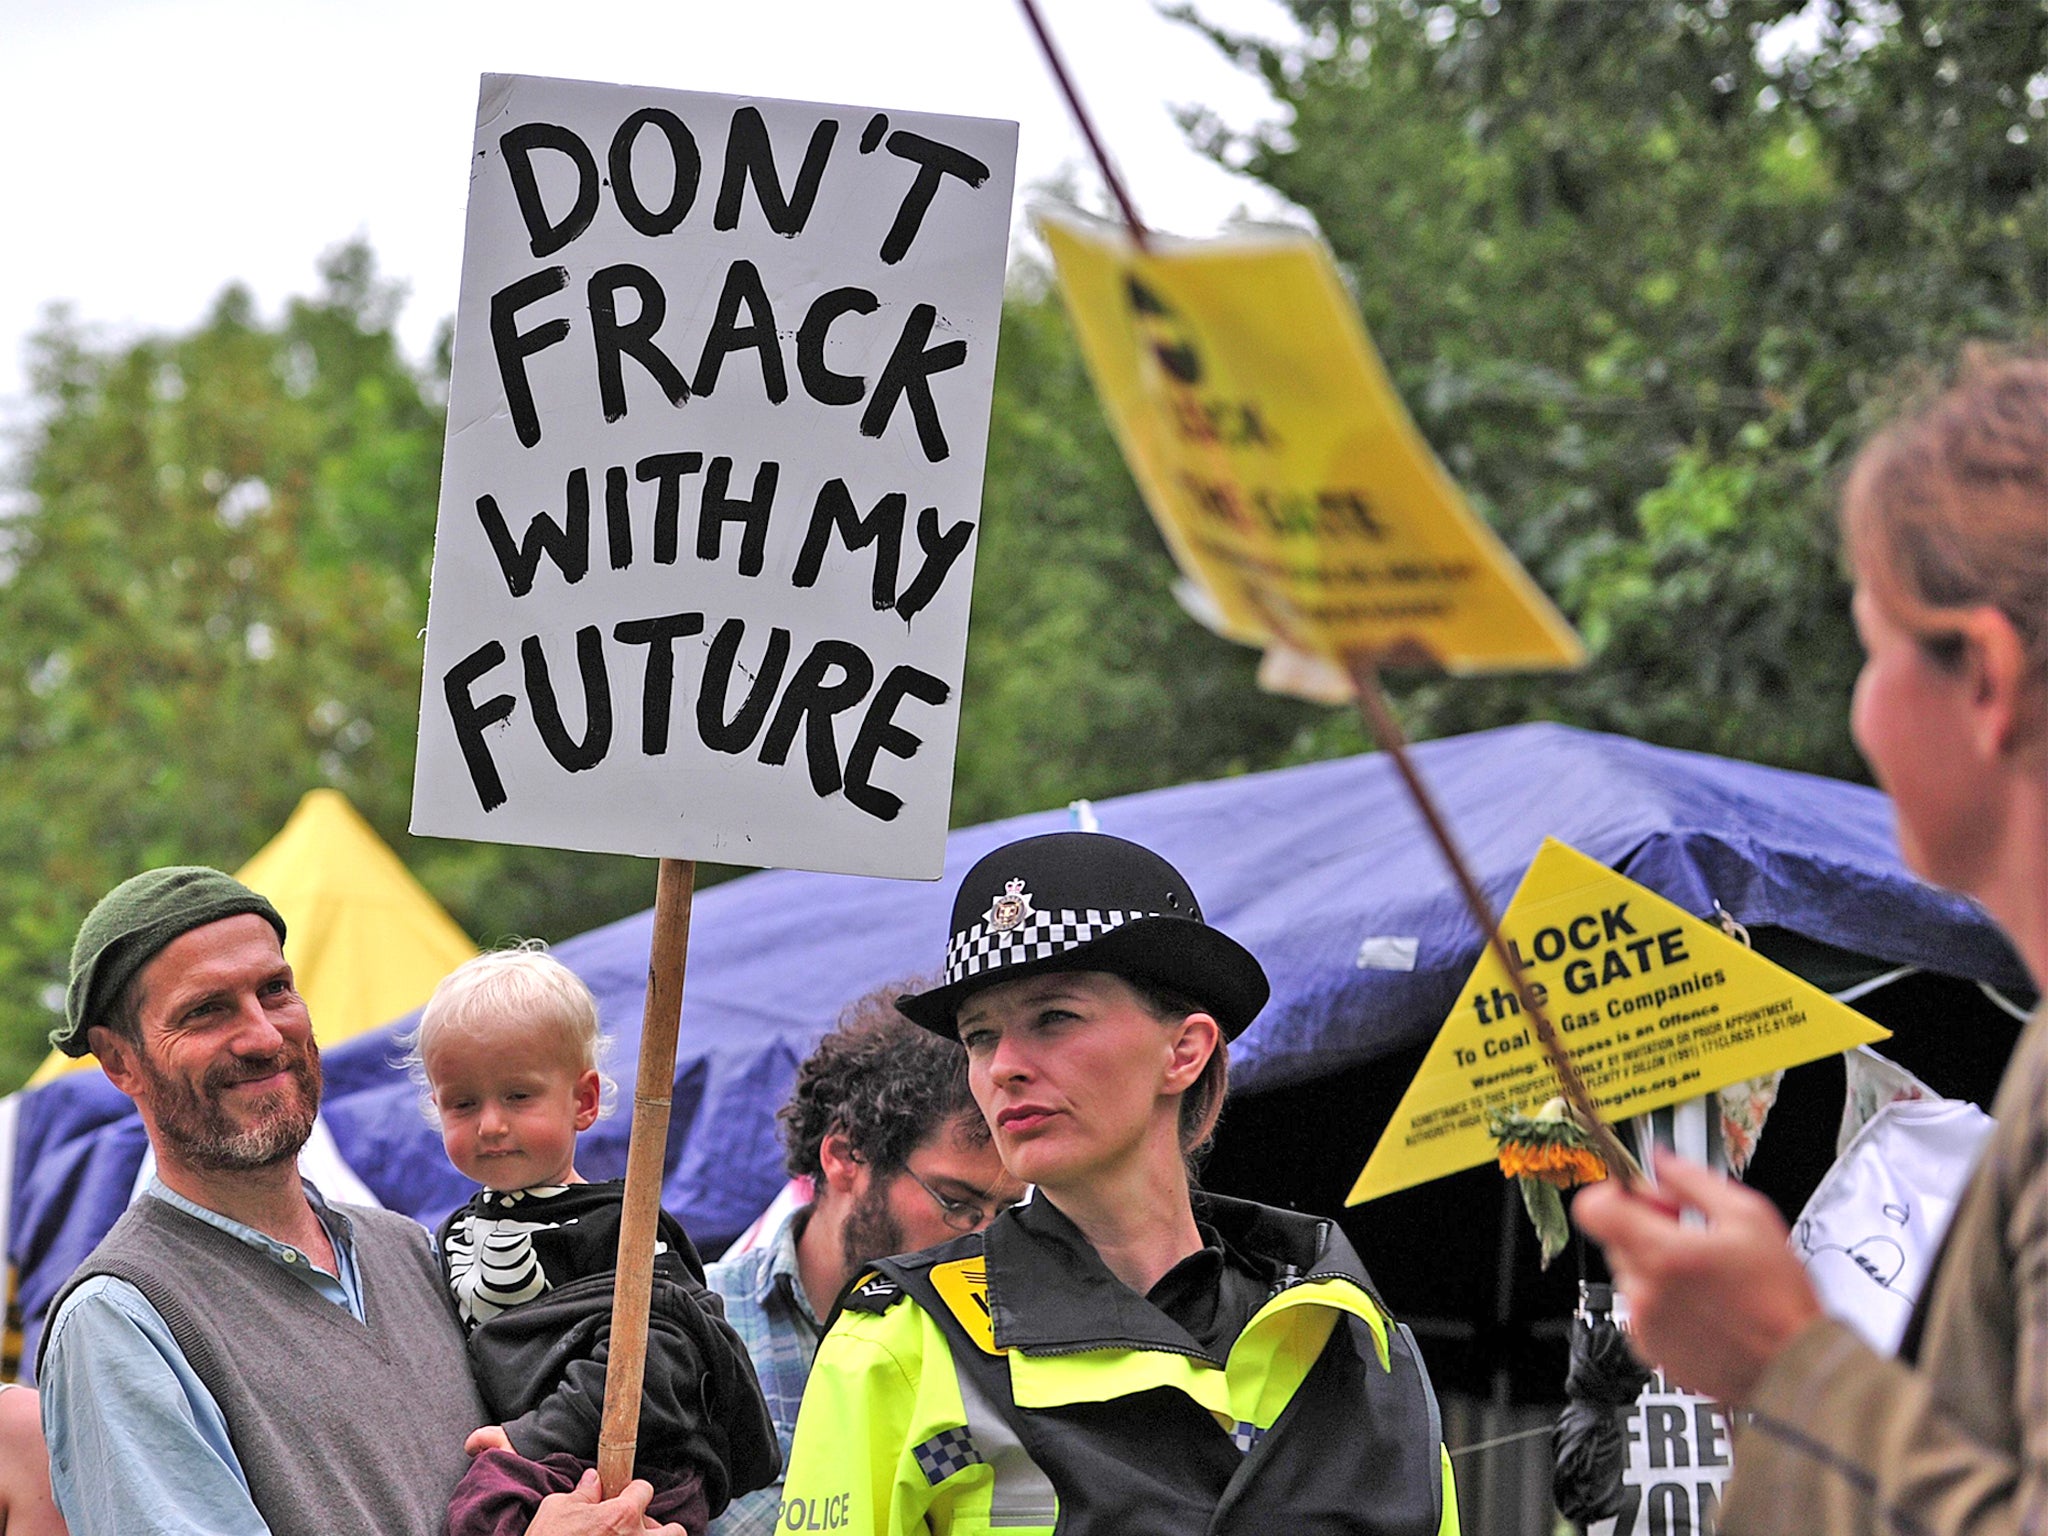 A ComRes poll of more than 1,000 people in the 40 most marginal constituencies has found low support for fracking from voters across the political spectrum